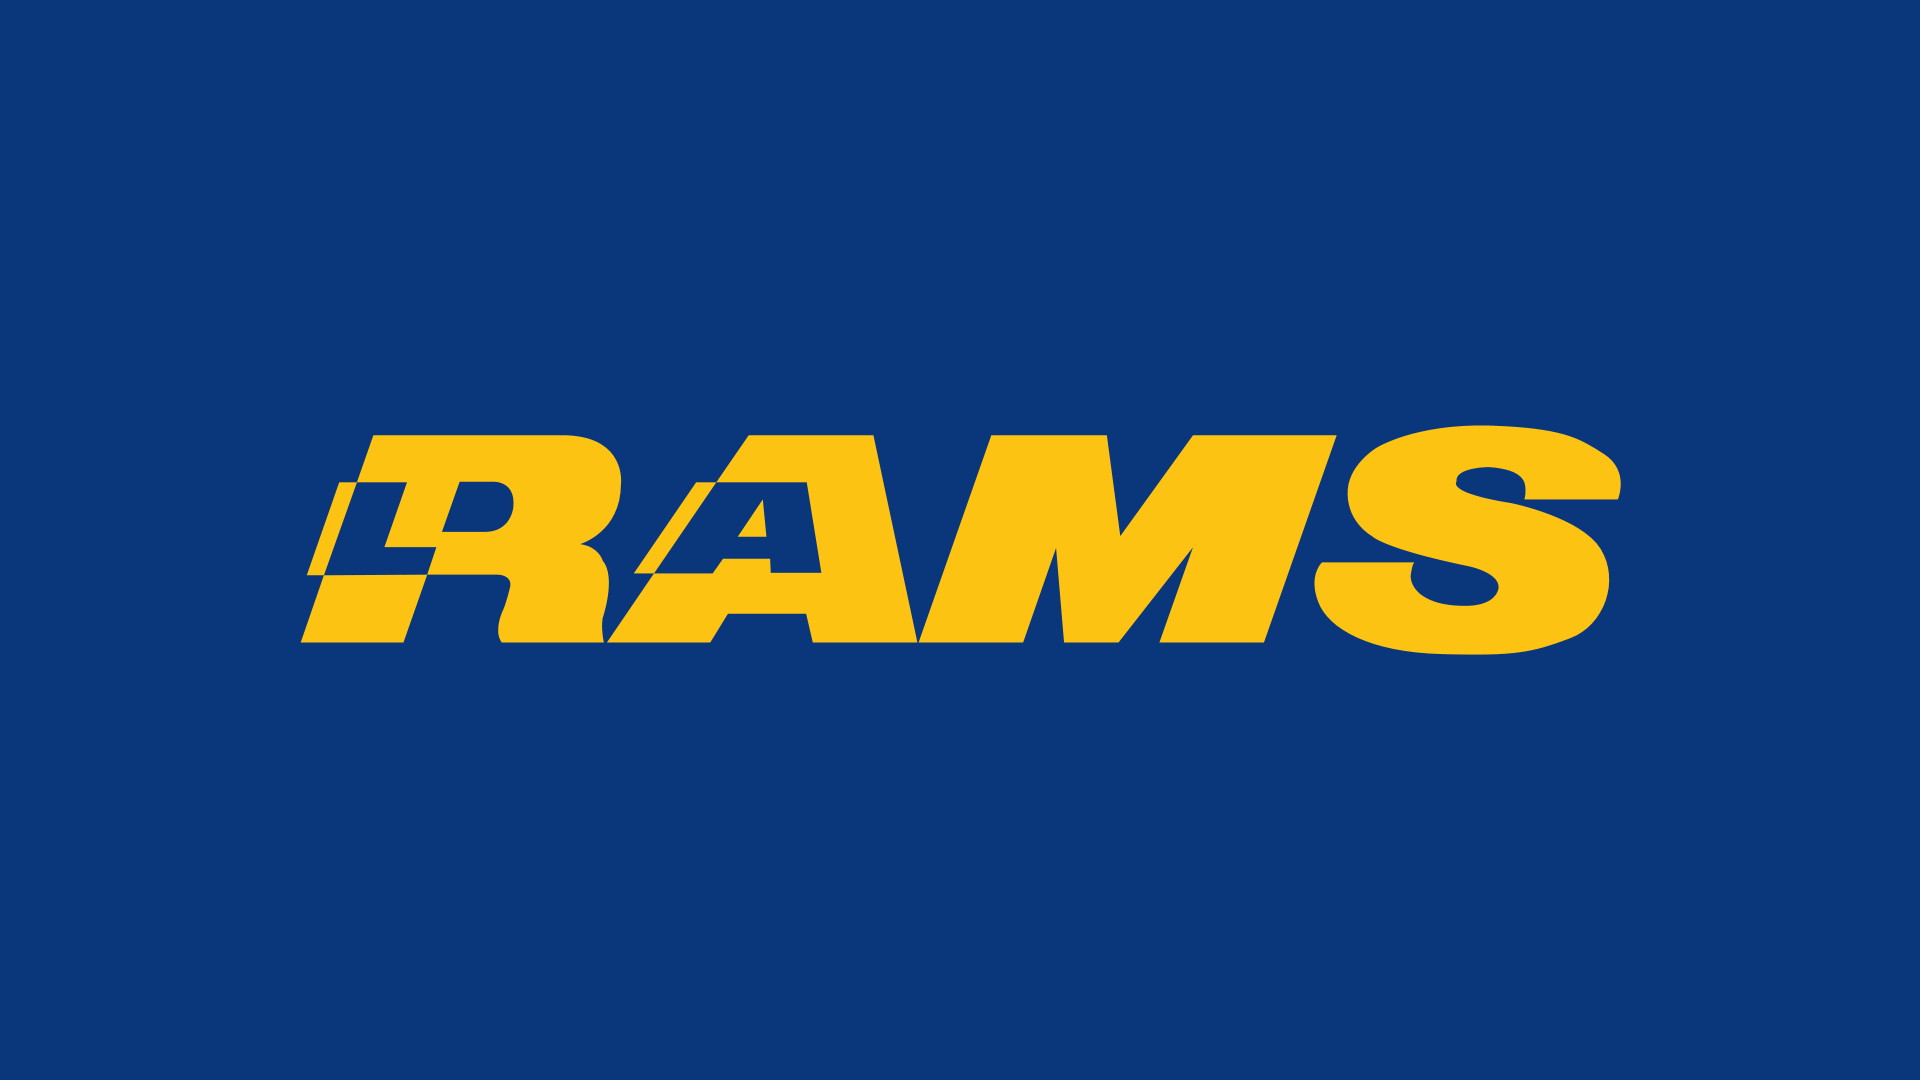 LA Rams Desktop Wallpapers With high-resolution 1920X1080 pixel. You can use this wallpaper for your Mac or Windows Desktop Background, iPhone, Android or Tablet and another Smartphone device